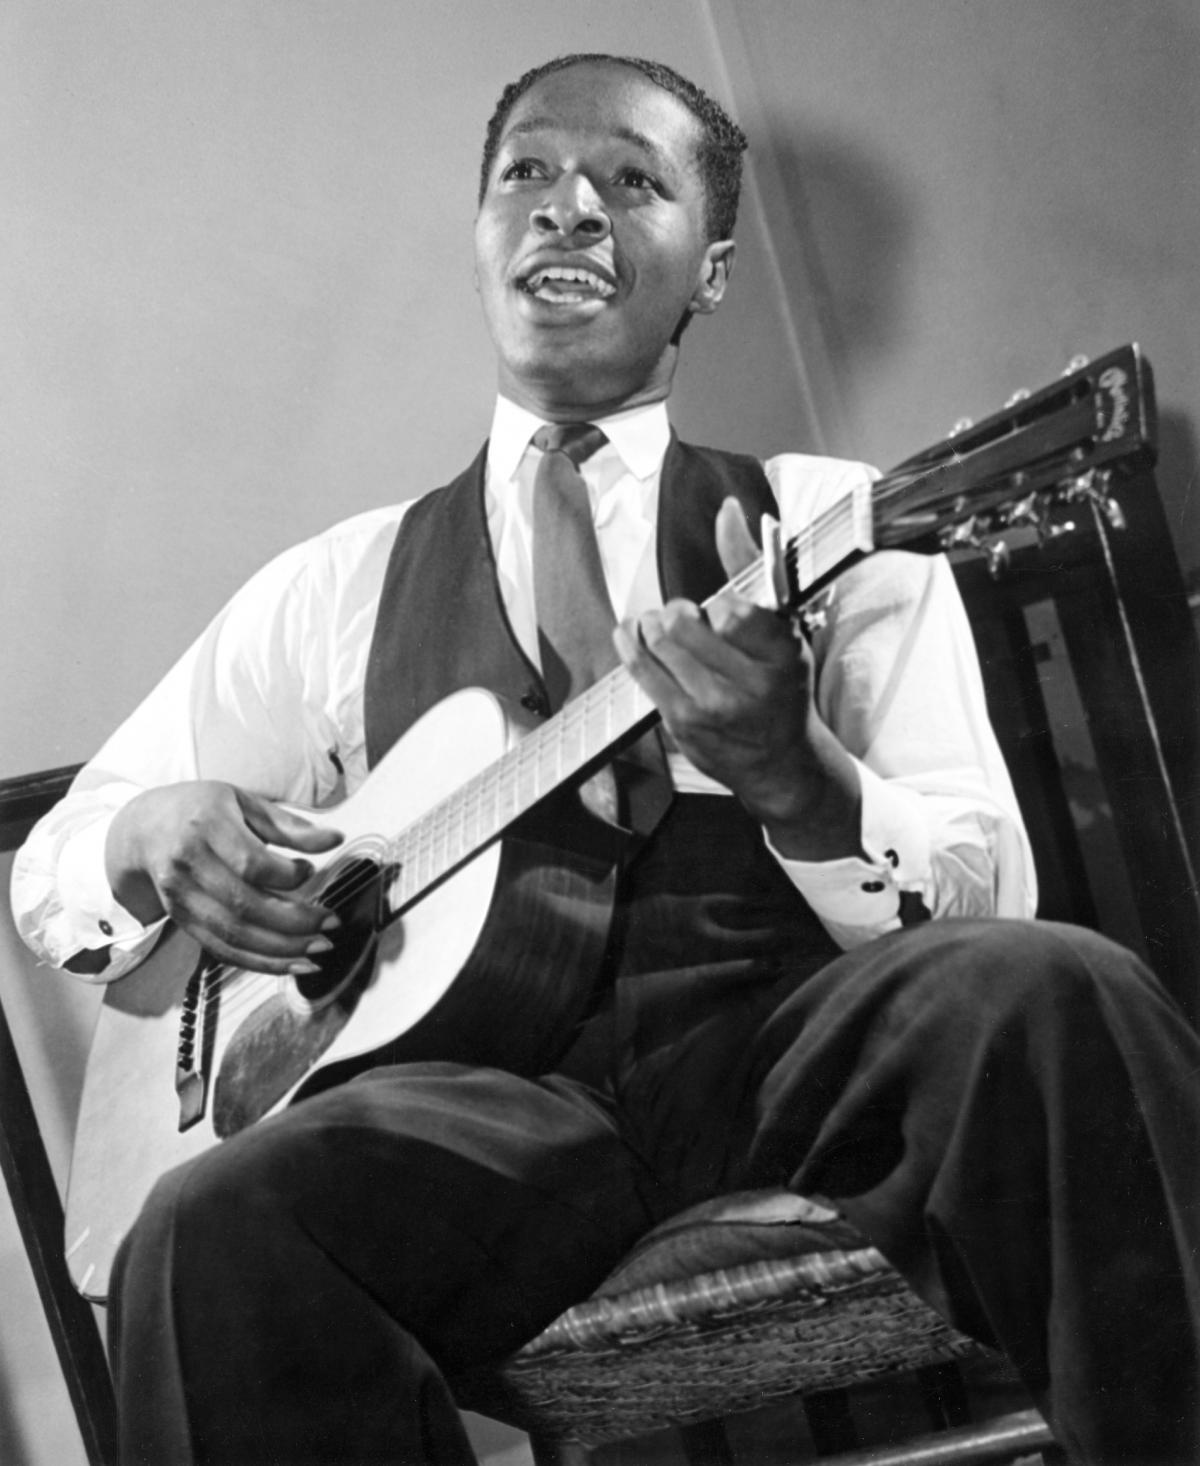 White, wearing a tie and vest, seated, strumming a guitar